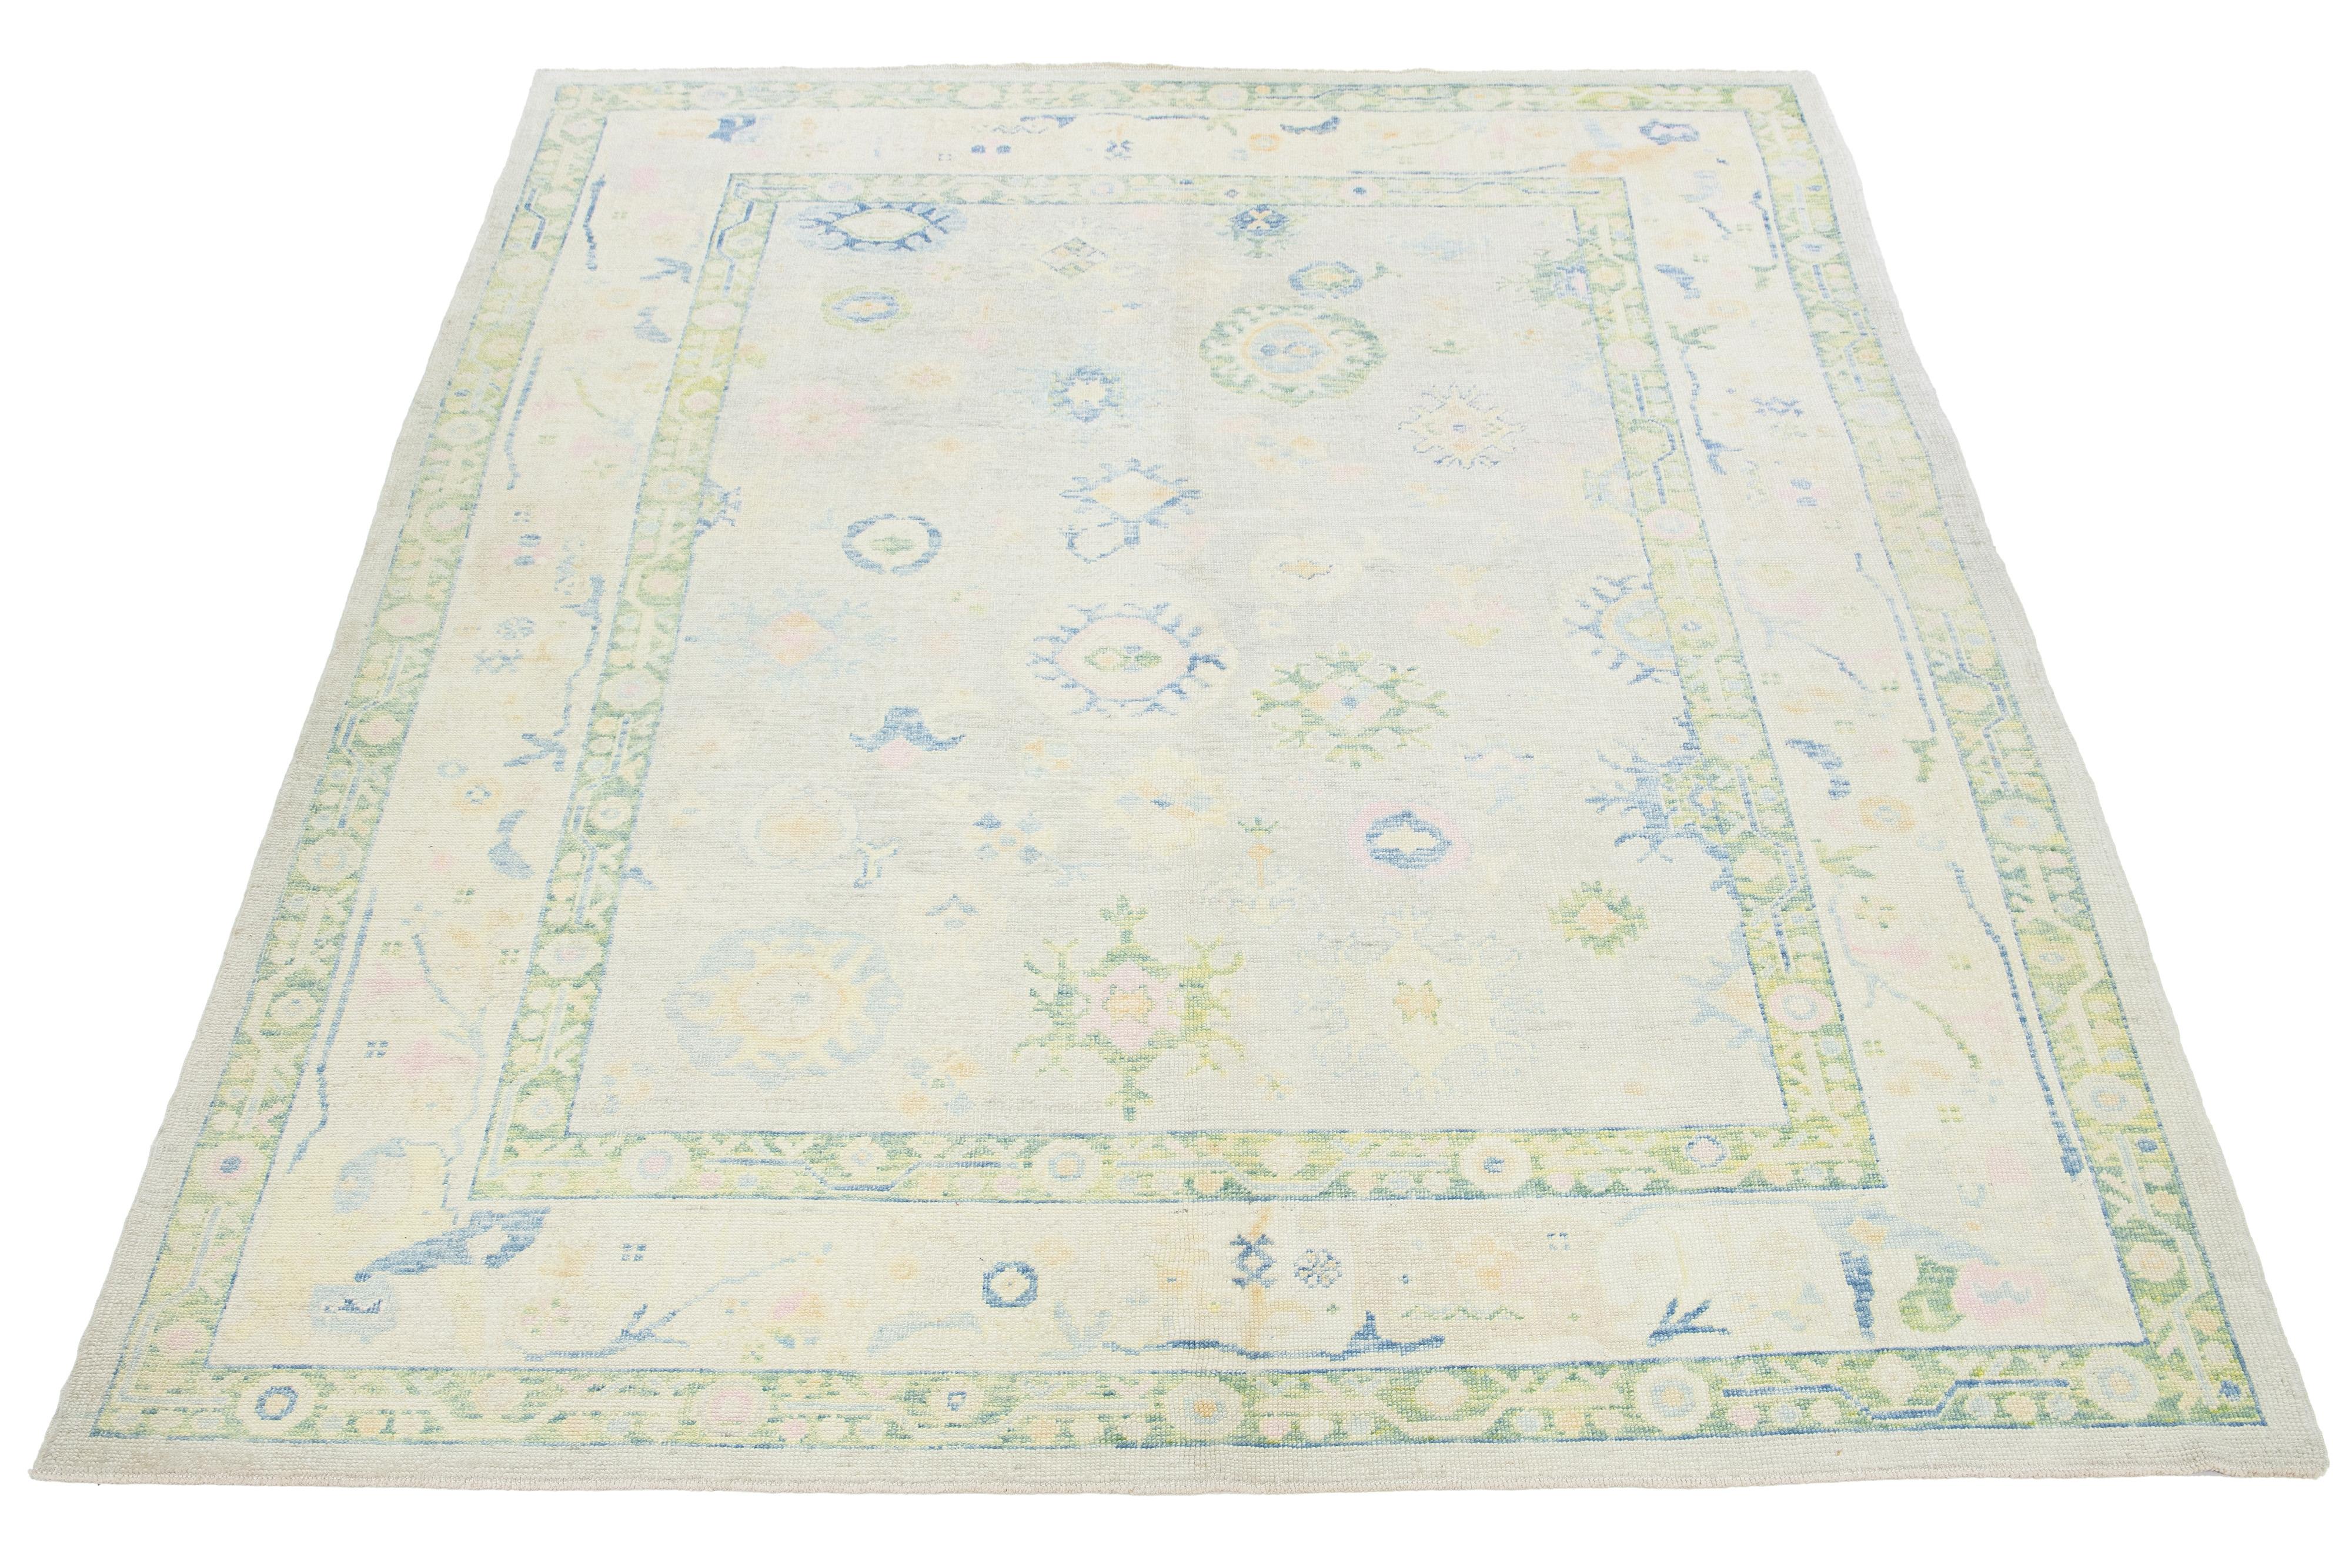 This modern Turkish hand-knotted wool rug features a beige field with a captivating blue, green, and yellow floral pattern.

This rug measures 9'6